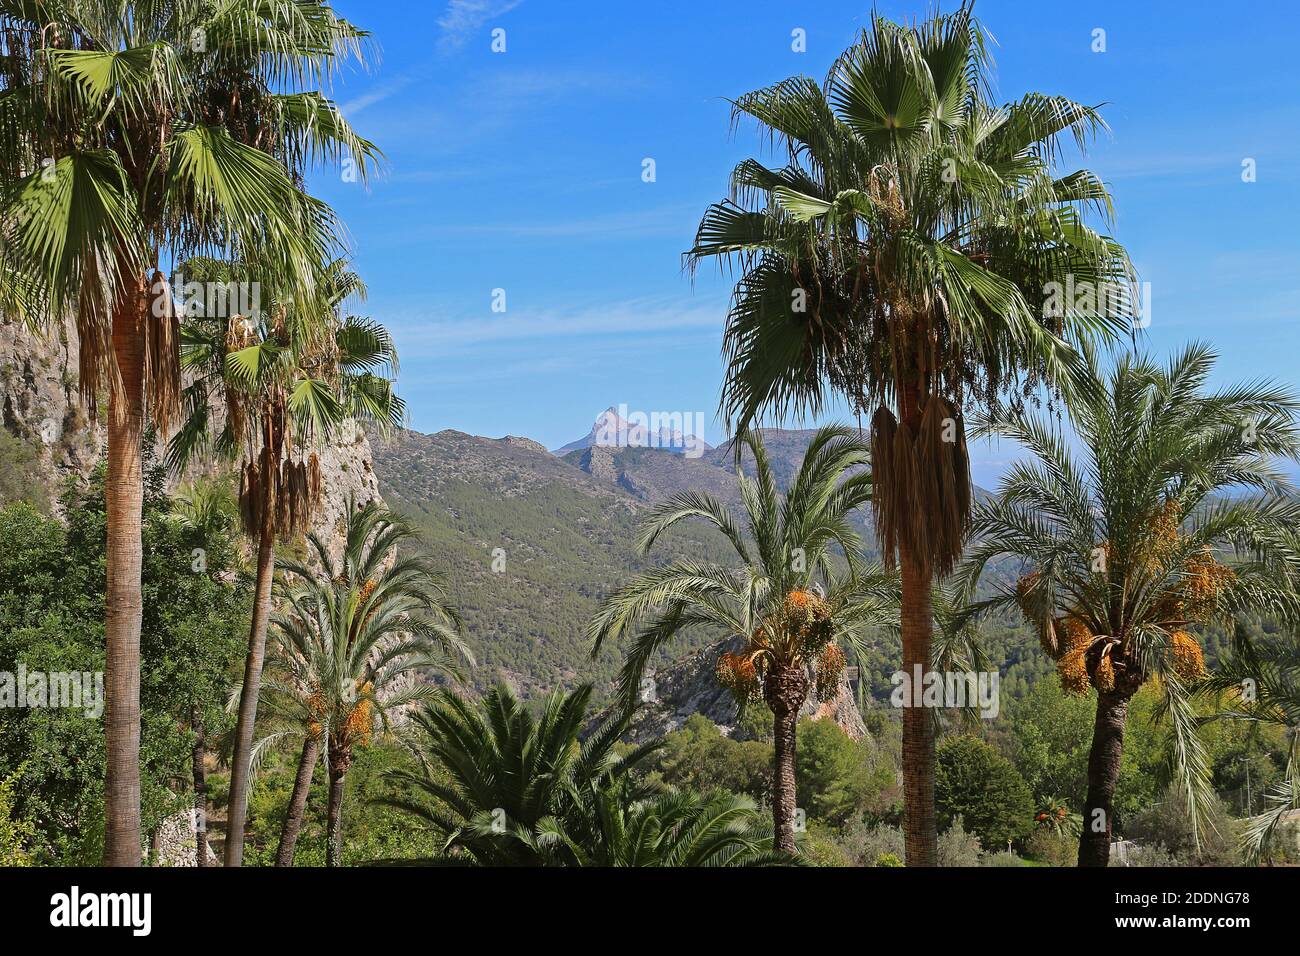 Sierra de Bernia as seen from the Castell de Guadalest in the Alicante Province of Spain. This isn't far from Benidorm on the Mediterranean coast. Stock Photo